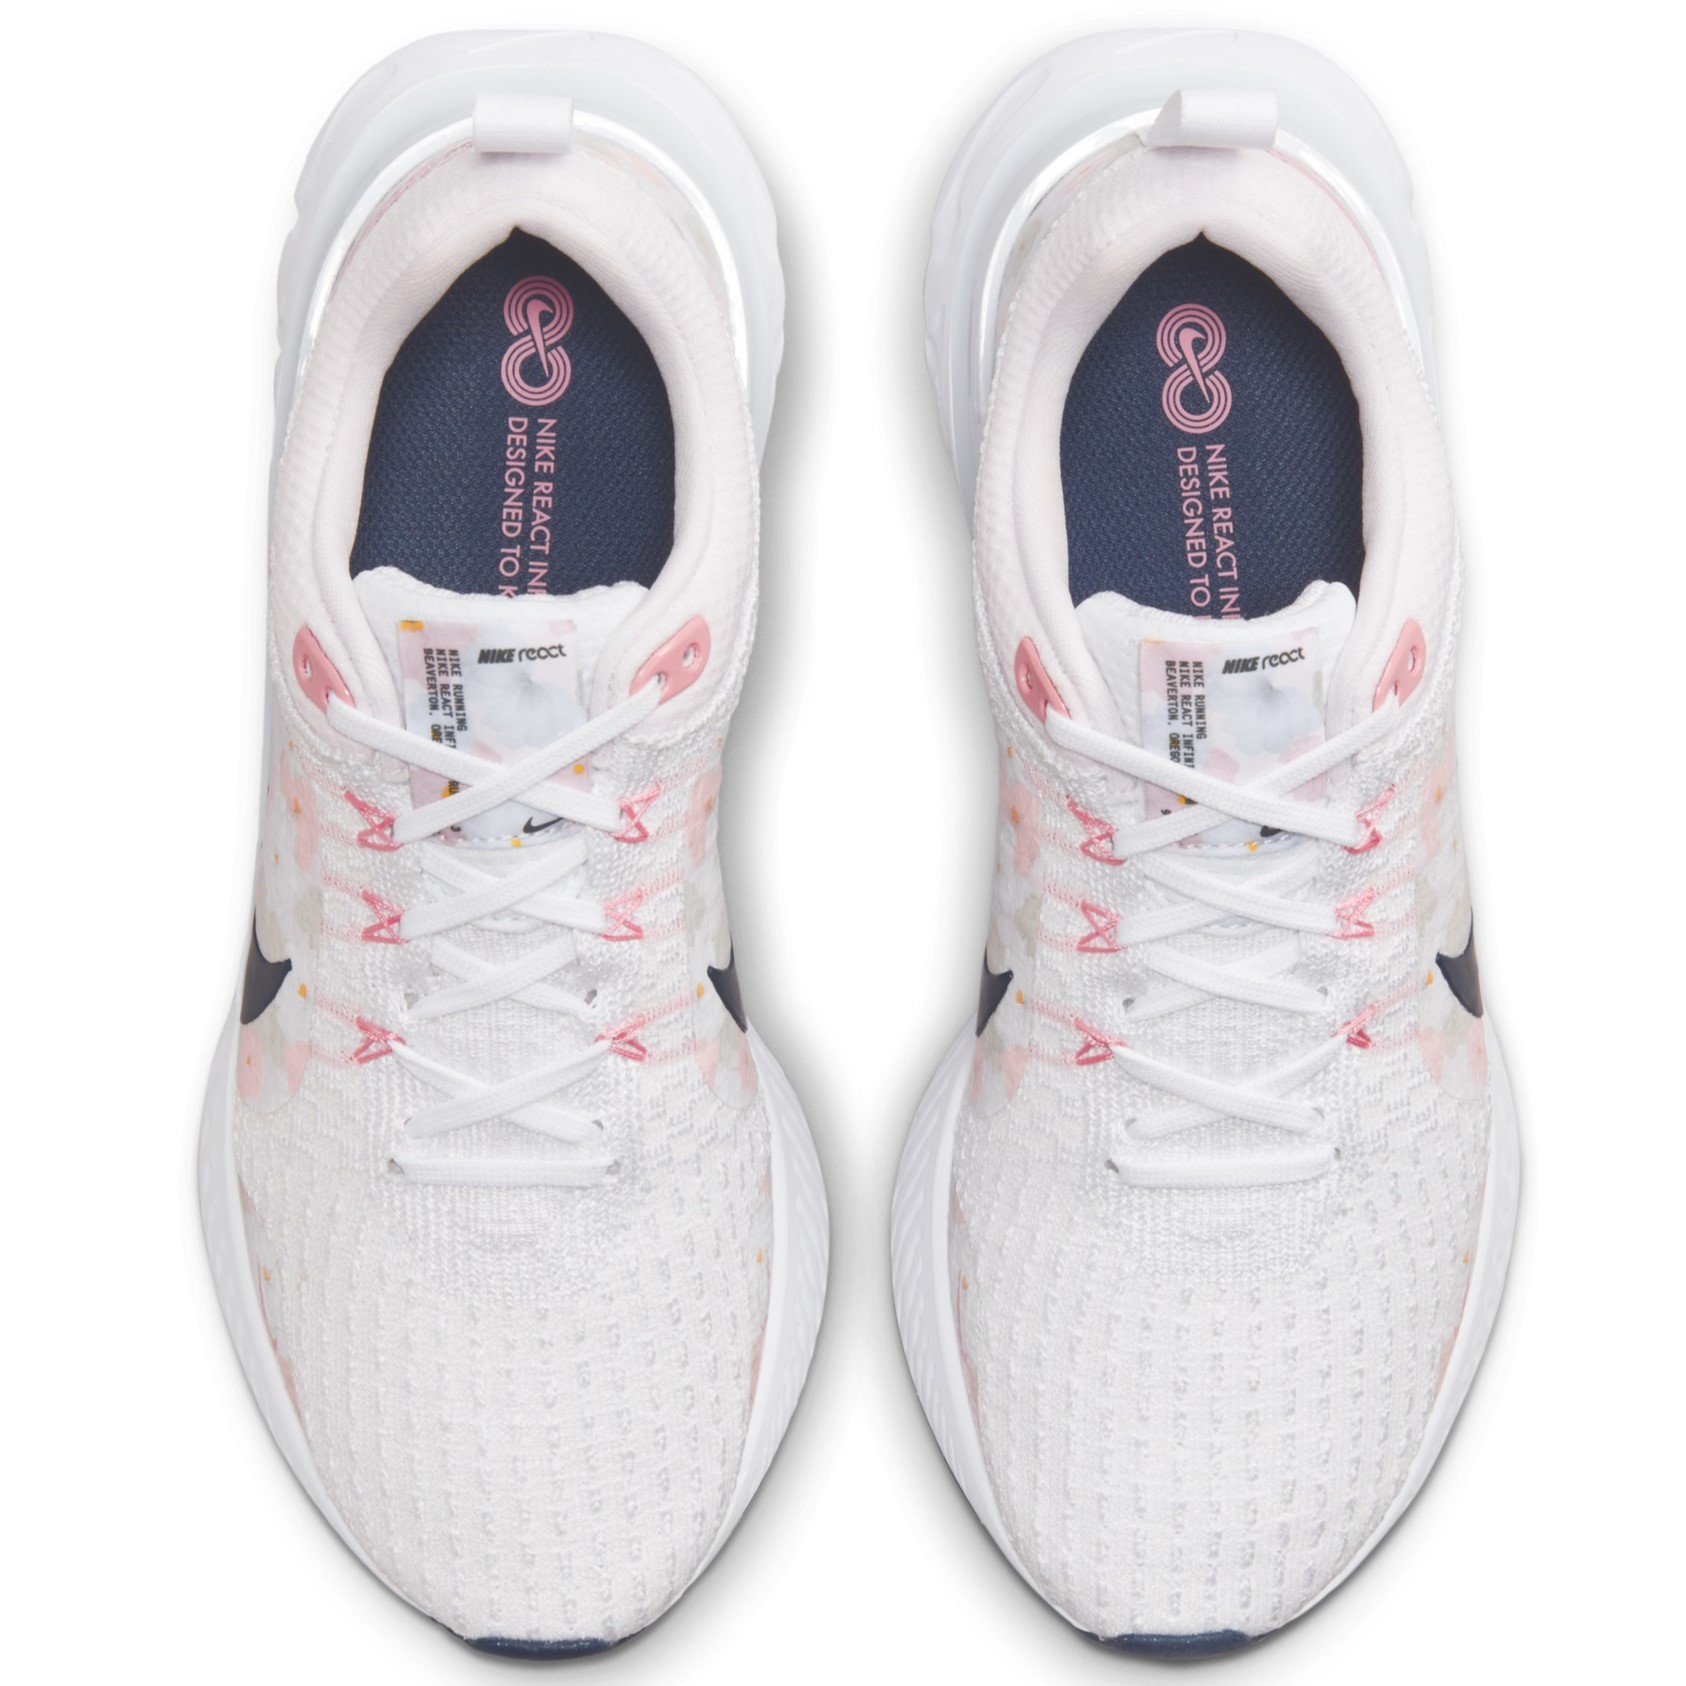 GIÀY THỂ THAO NIKE NỮ REACT INFINITY 3 PREMIUM WHITE PEARL PINK WOMENS ROAD RUNNING SHOES FD4151-100 7